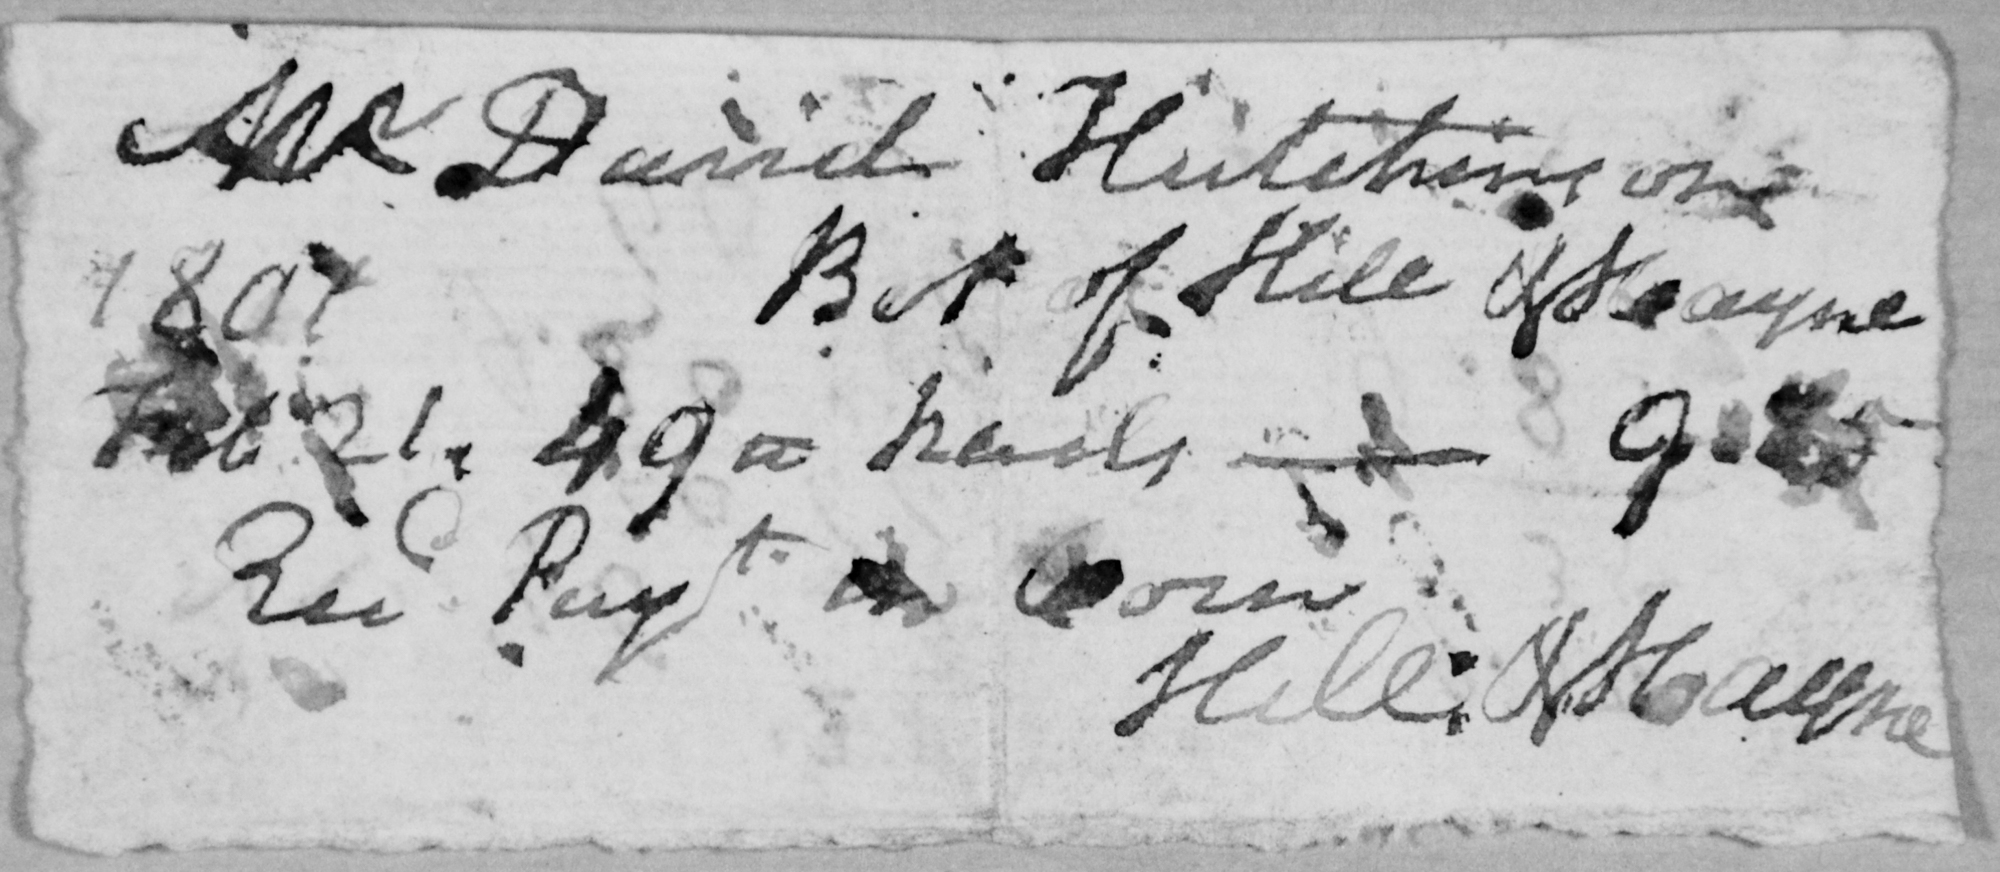 DAVID HUTCHISONS BILL FOR NAILS - HILL AND HAYNE IRONWORKS FEB. 21, 1801